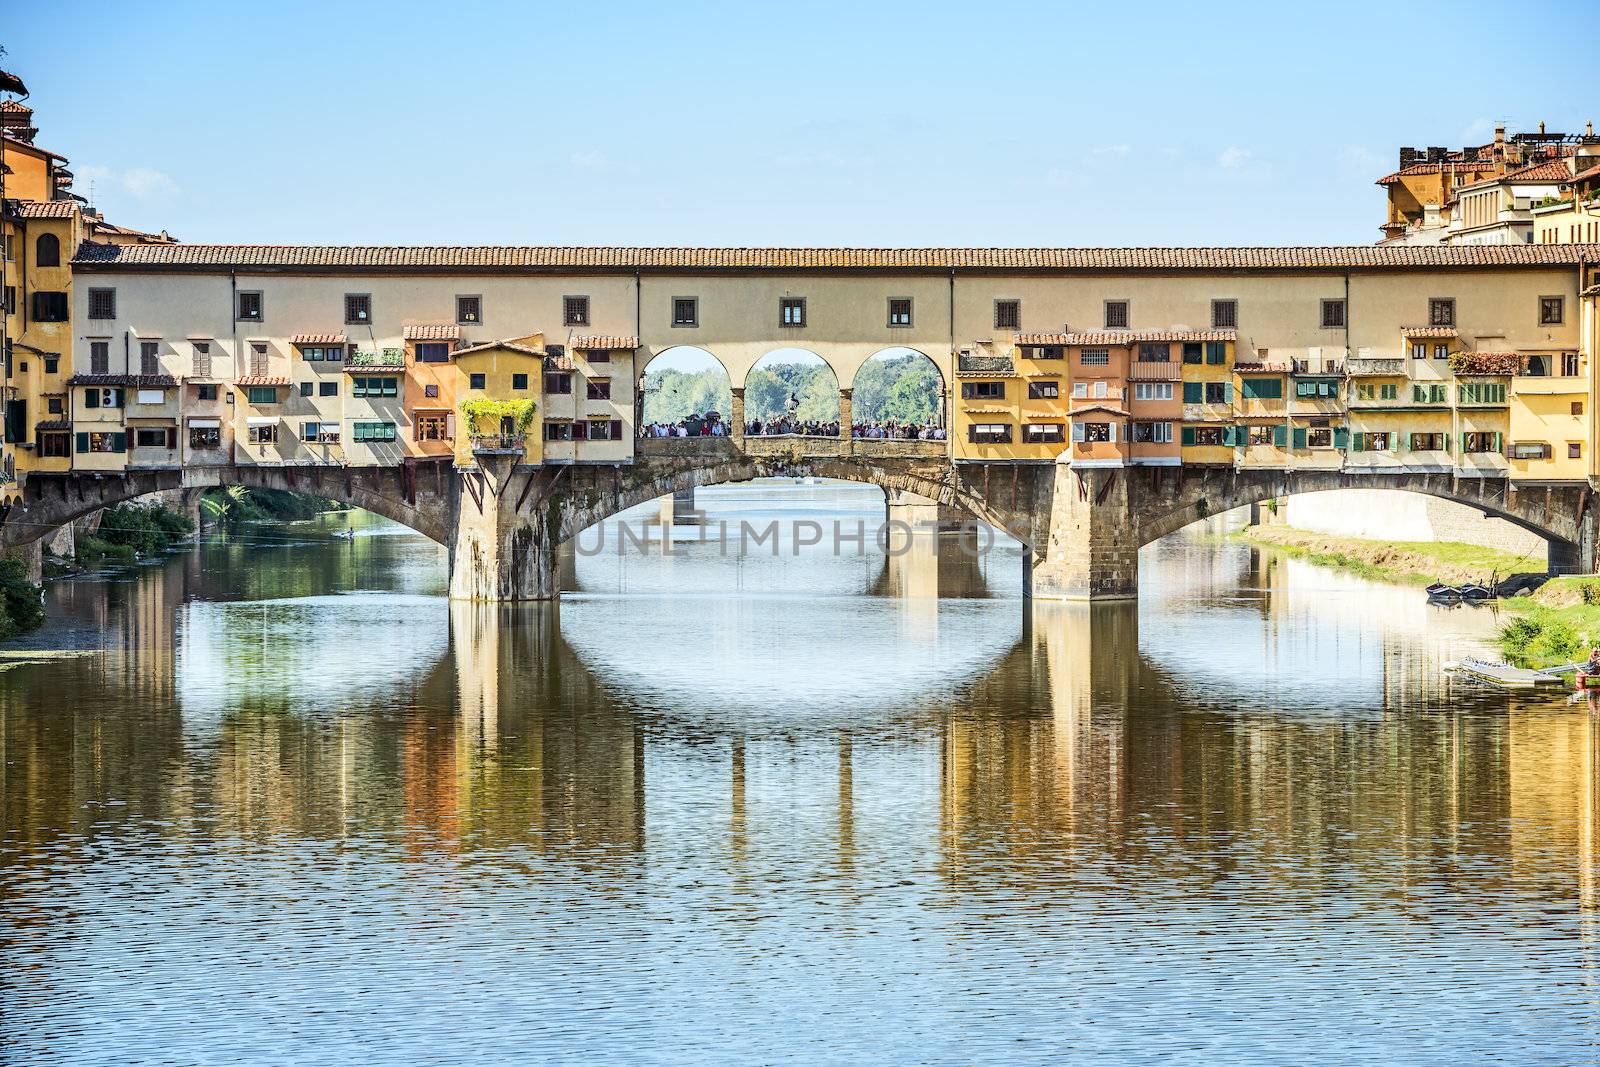 Picture of the famous ponte Vecchio in Florence, Italy